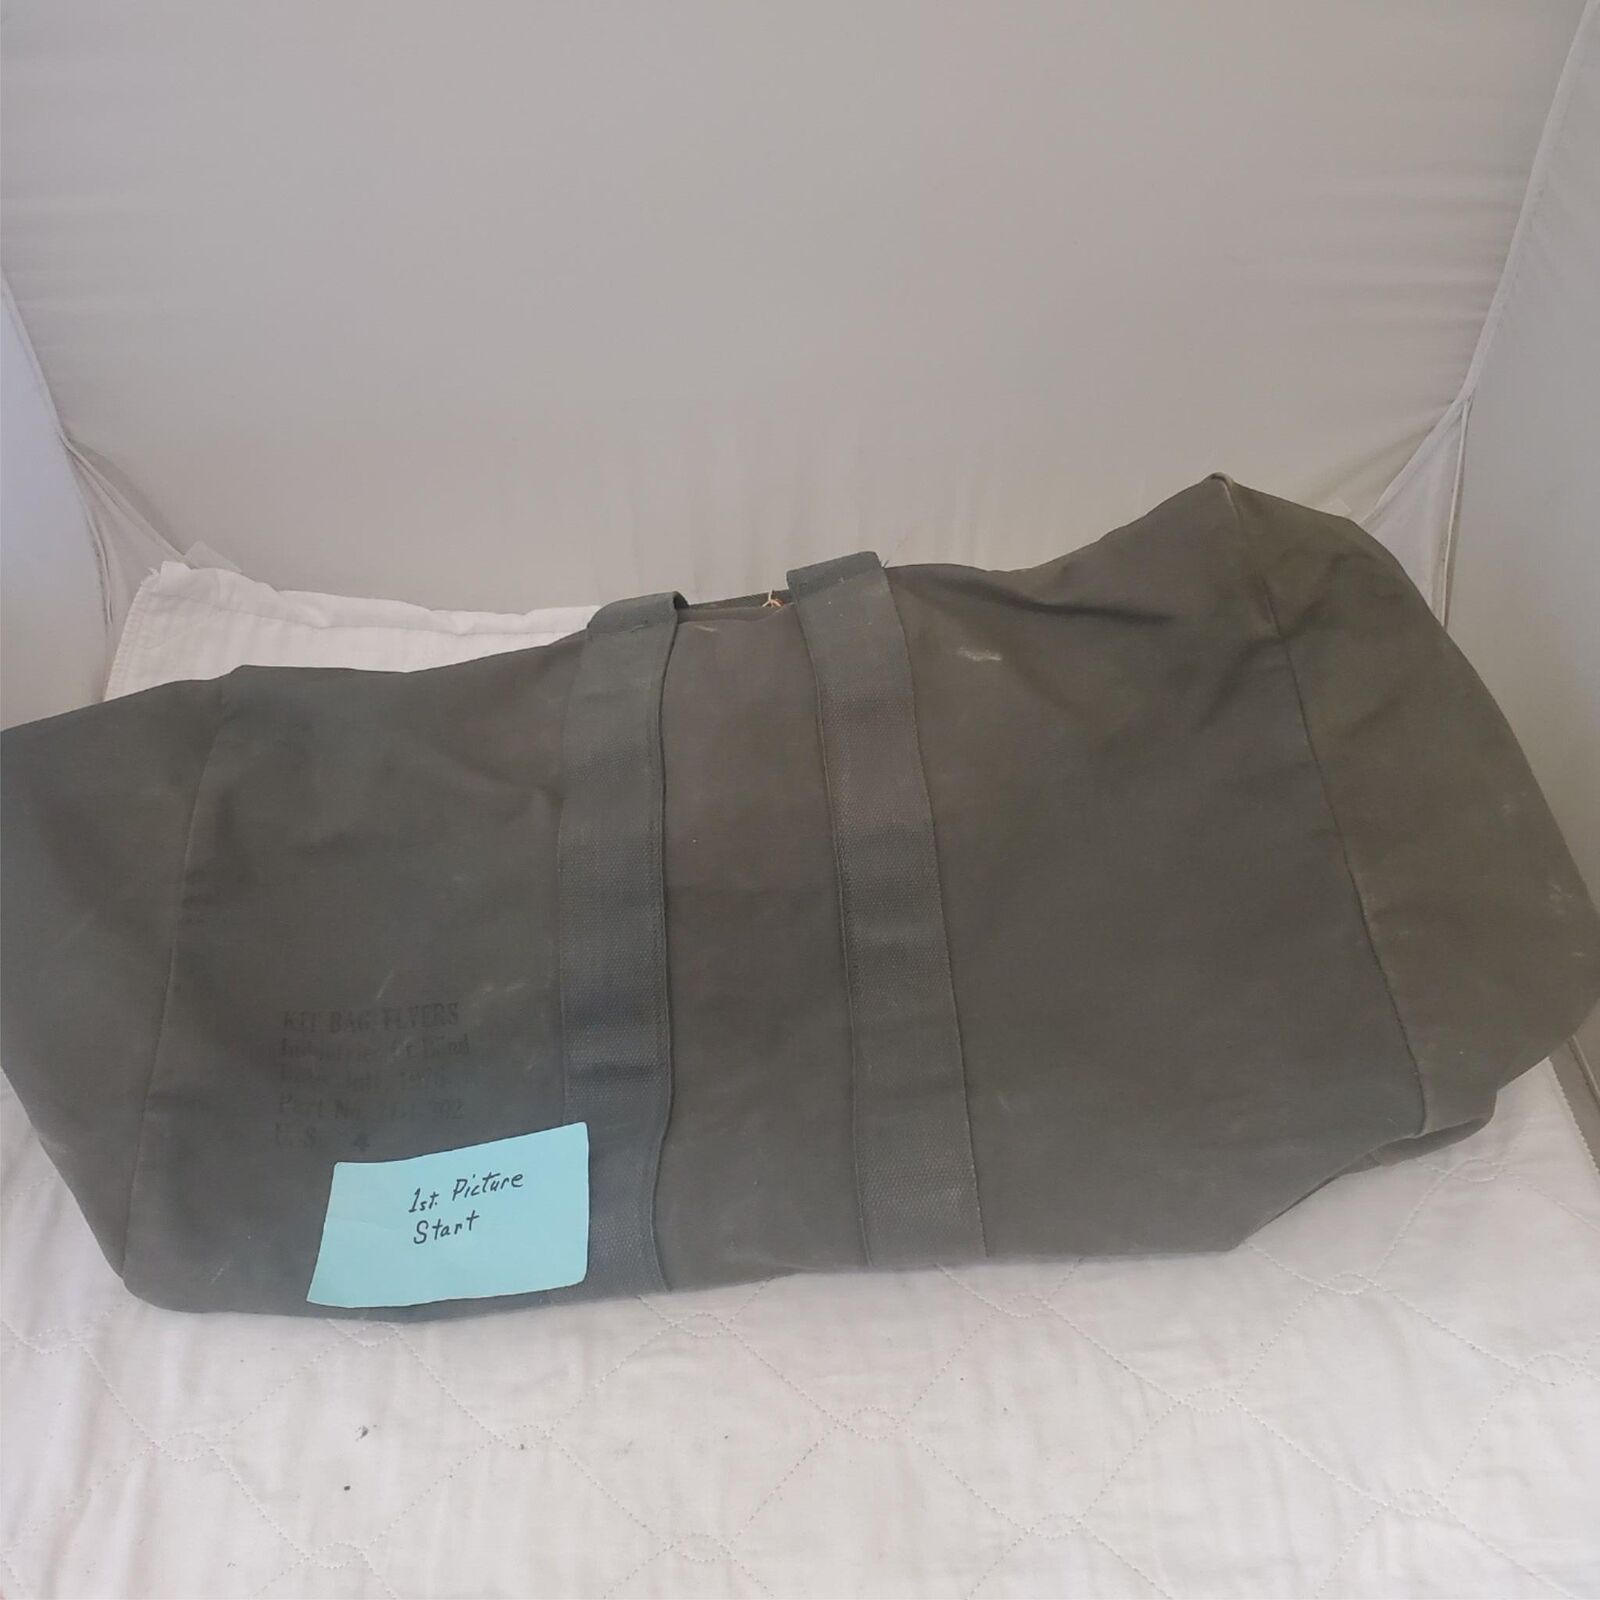 Vintage US Army Military Canvas Green Flyers Kit Cargo Parachute Bag 1976s